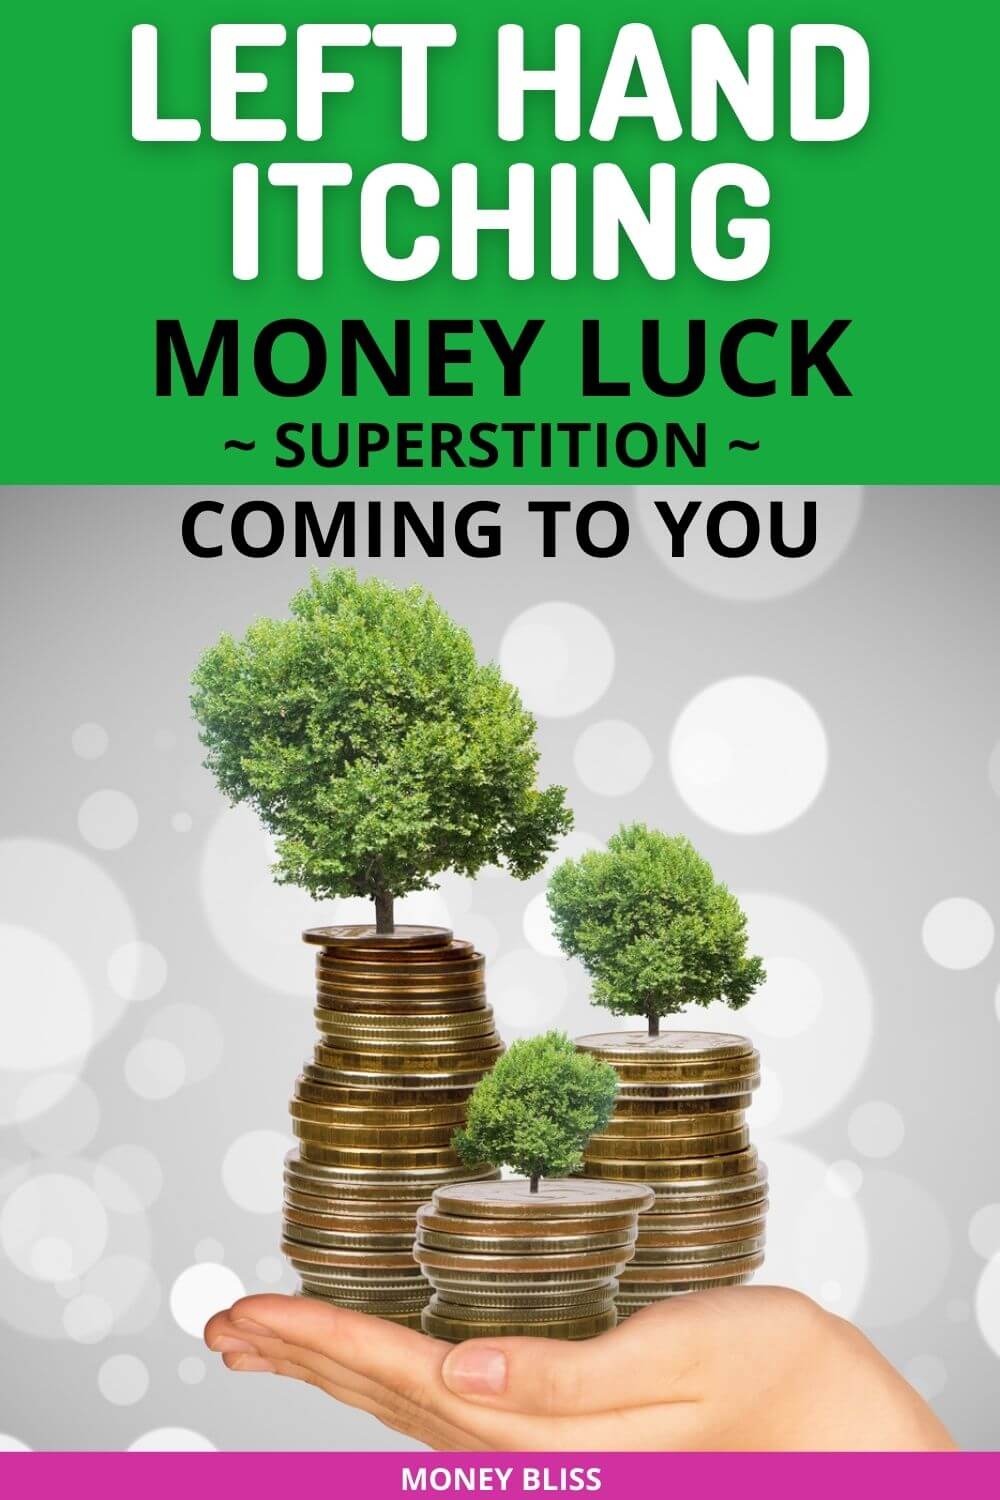 Learn about the superstitions and myths surrounding left hand itching. Money attracts money and why you need to open to the concept.